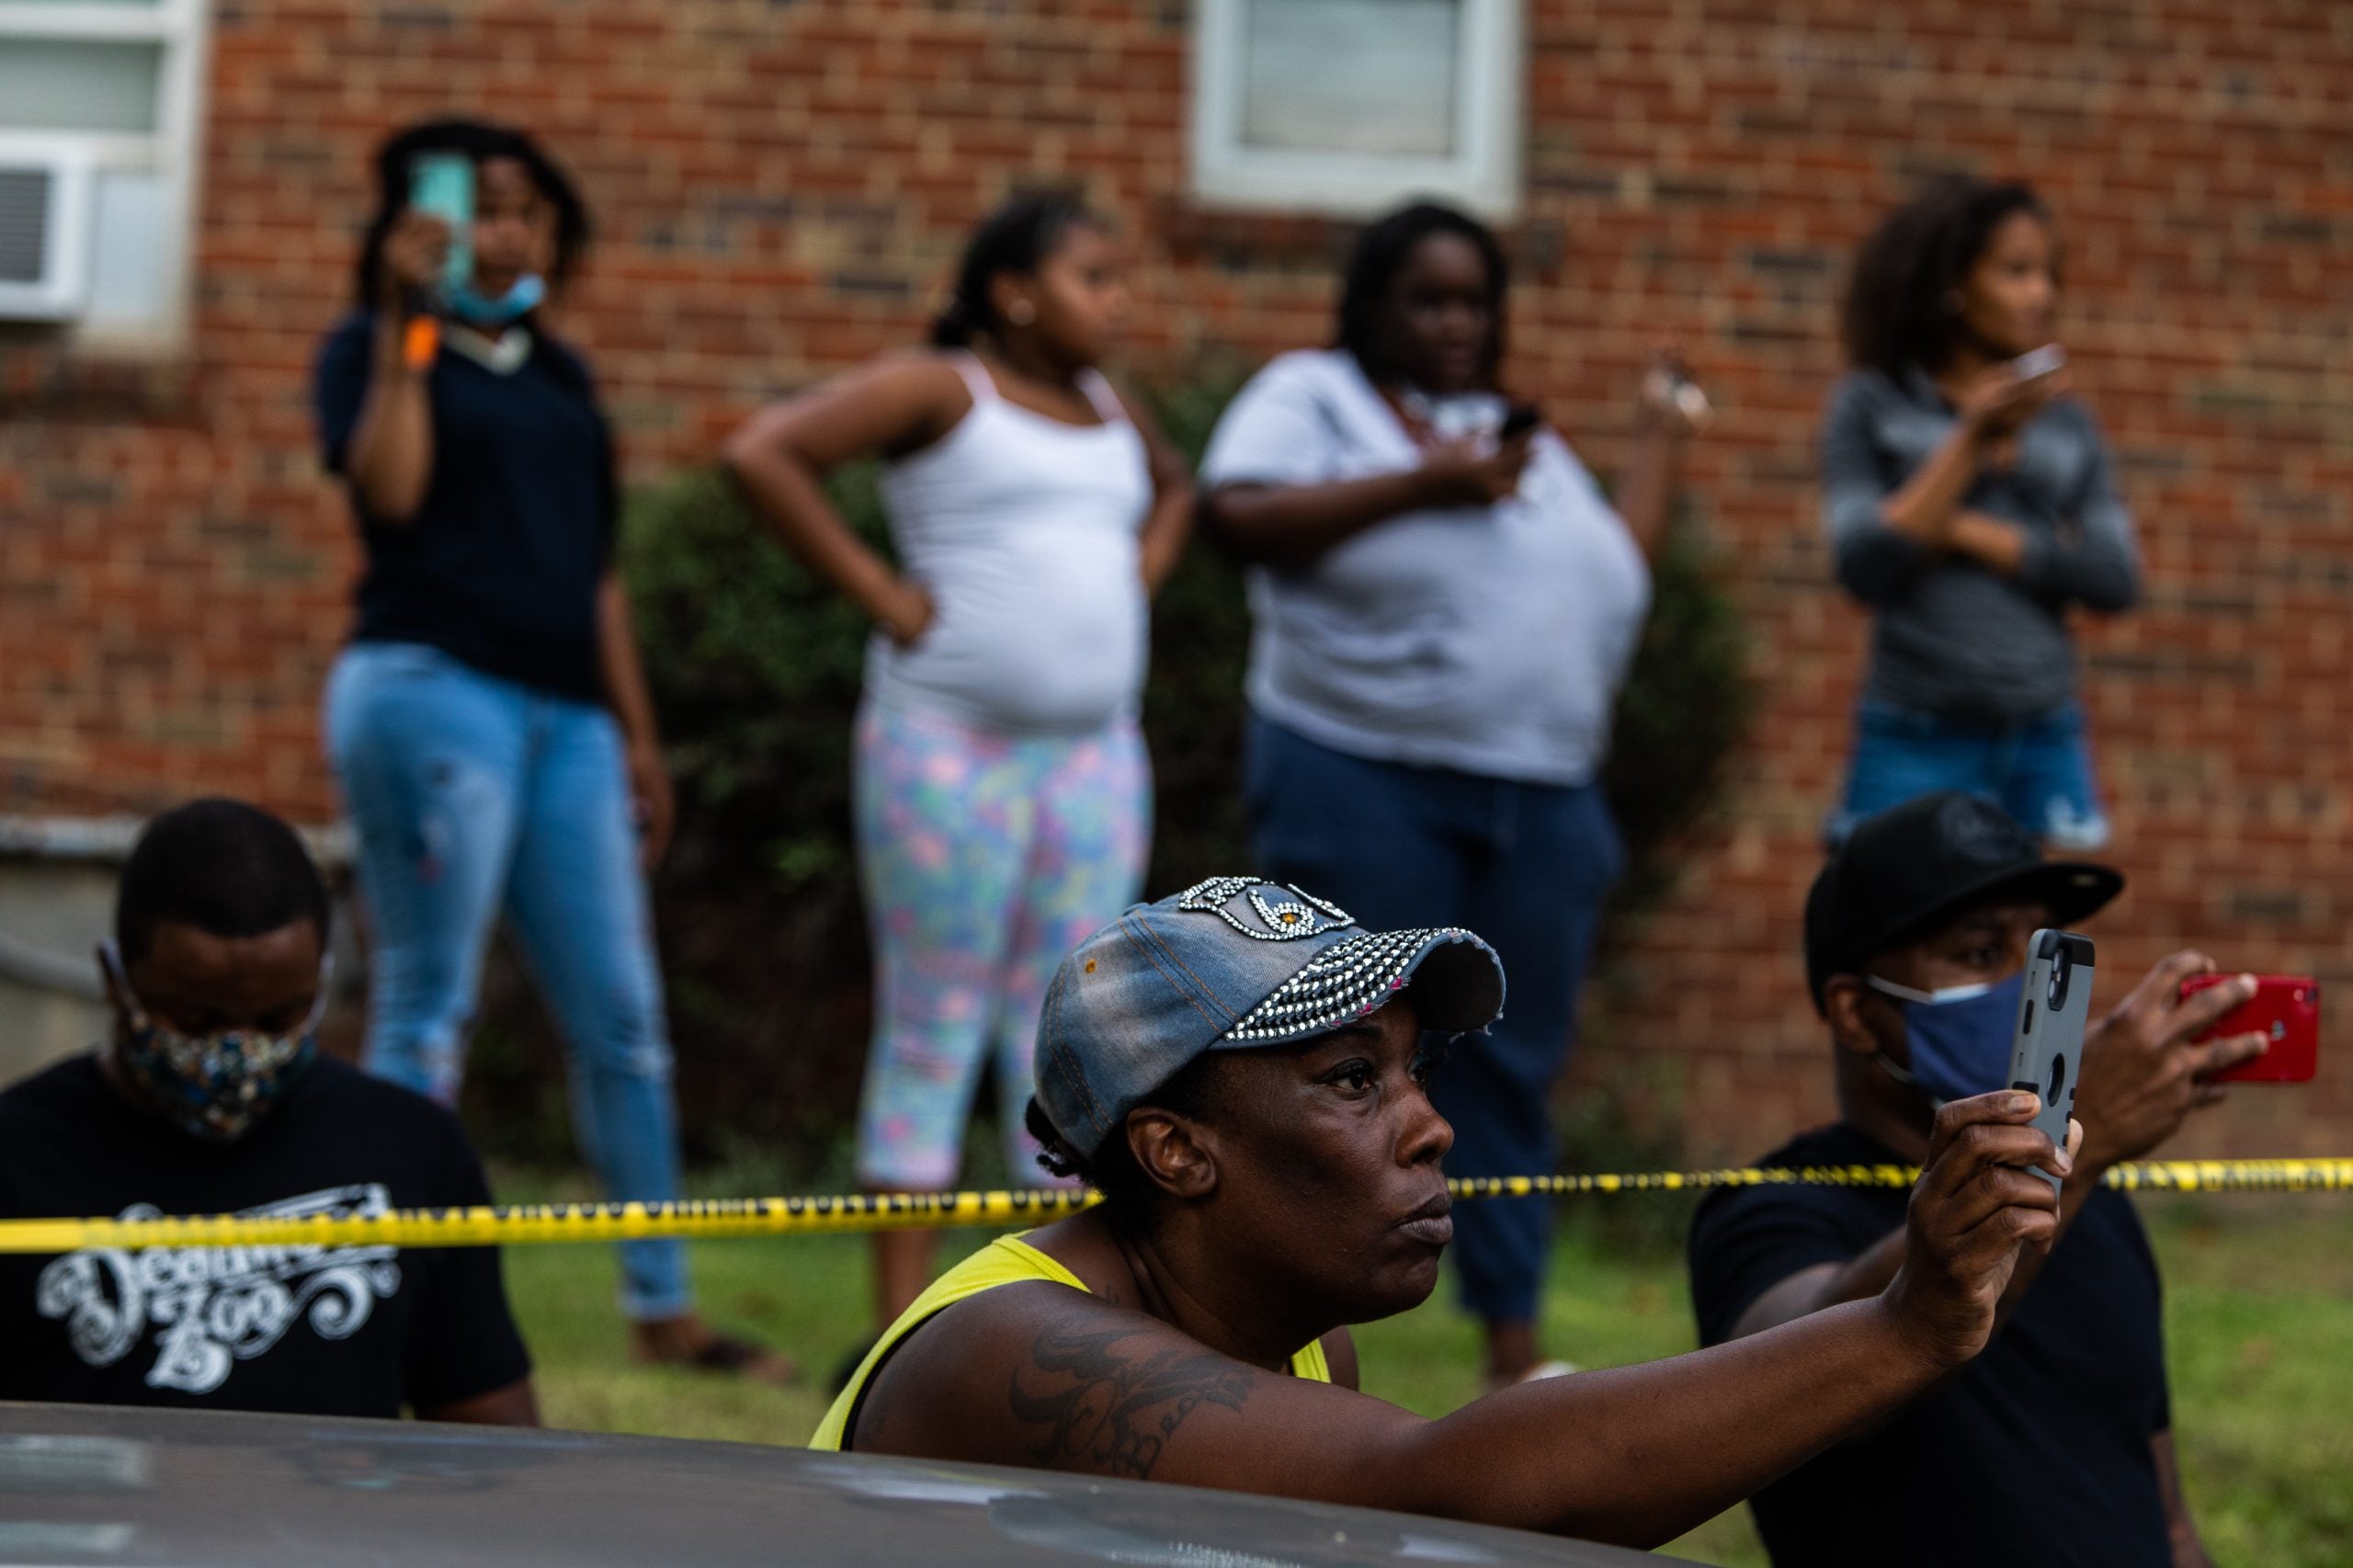 #JusticeForDeon Trends After D.C. Police Fatally Shoot Black Teen